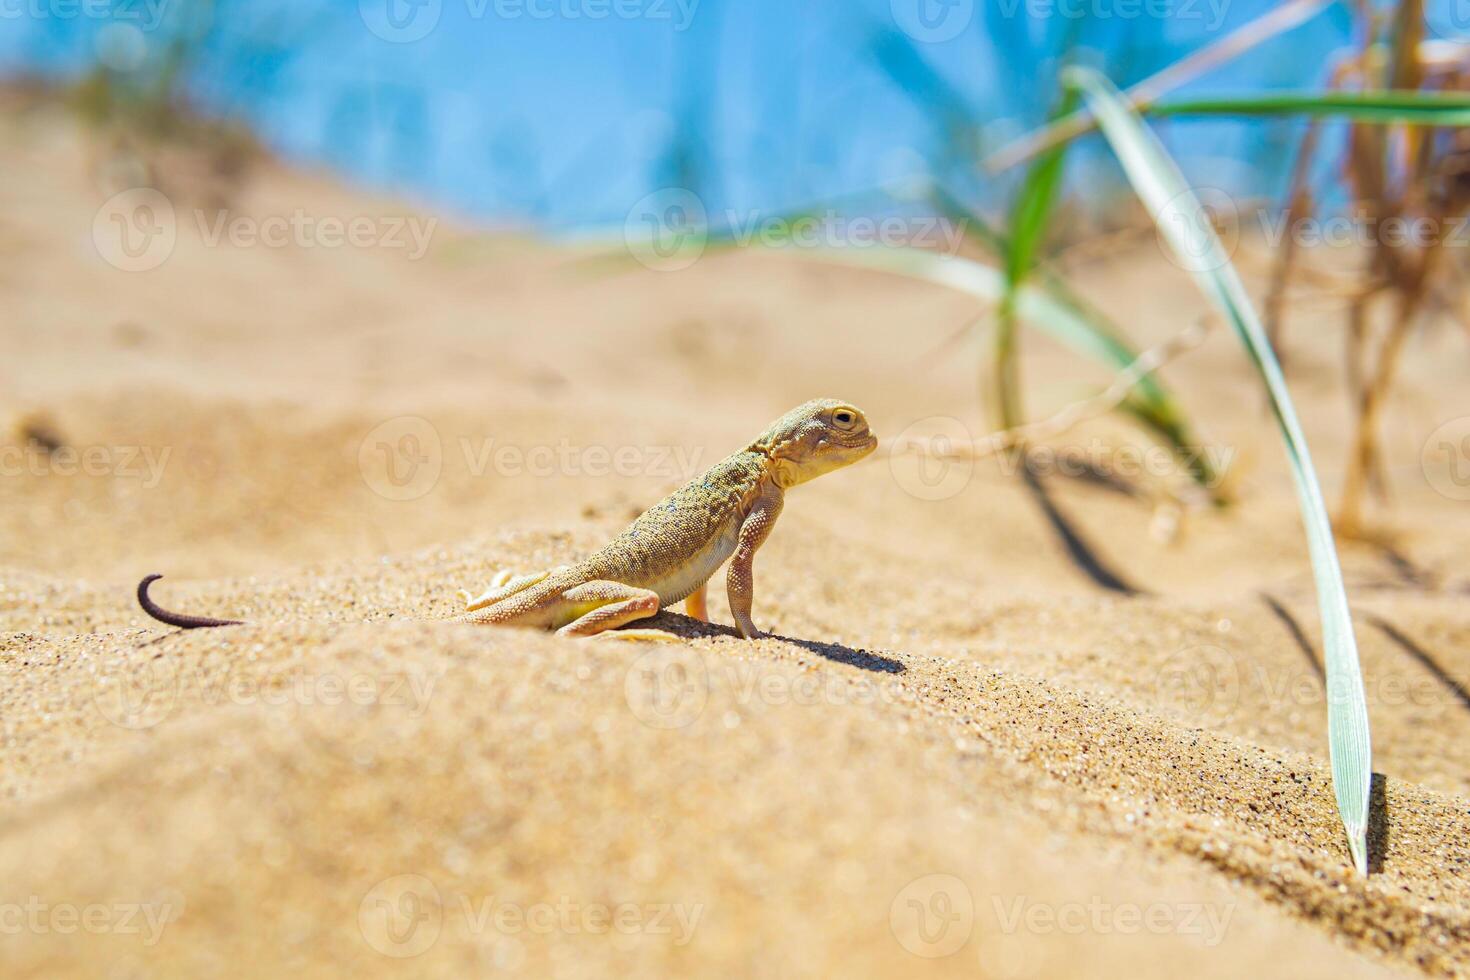 lizard toad-headed agama among the dry grass in the dunes photo